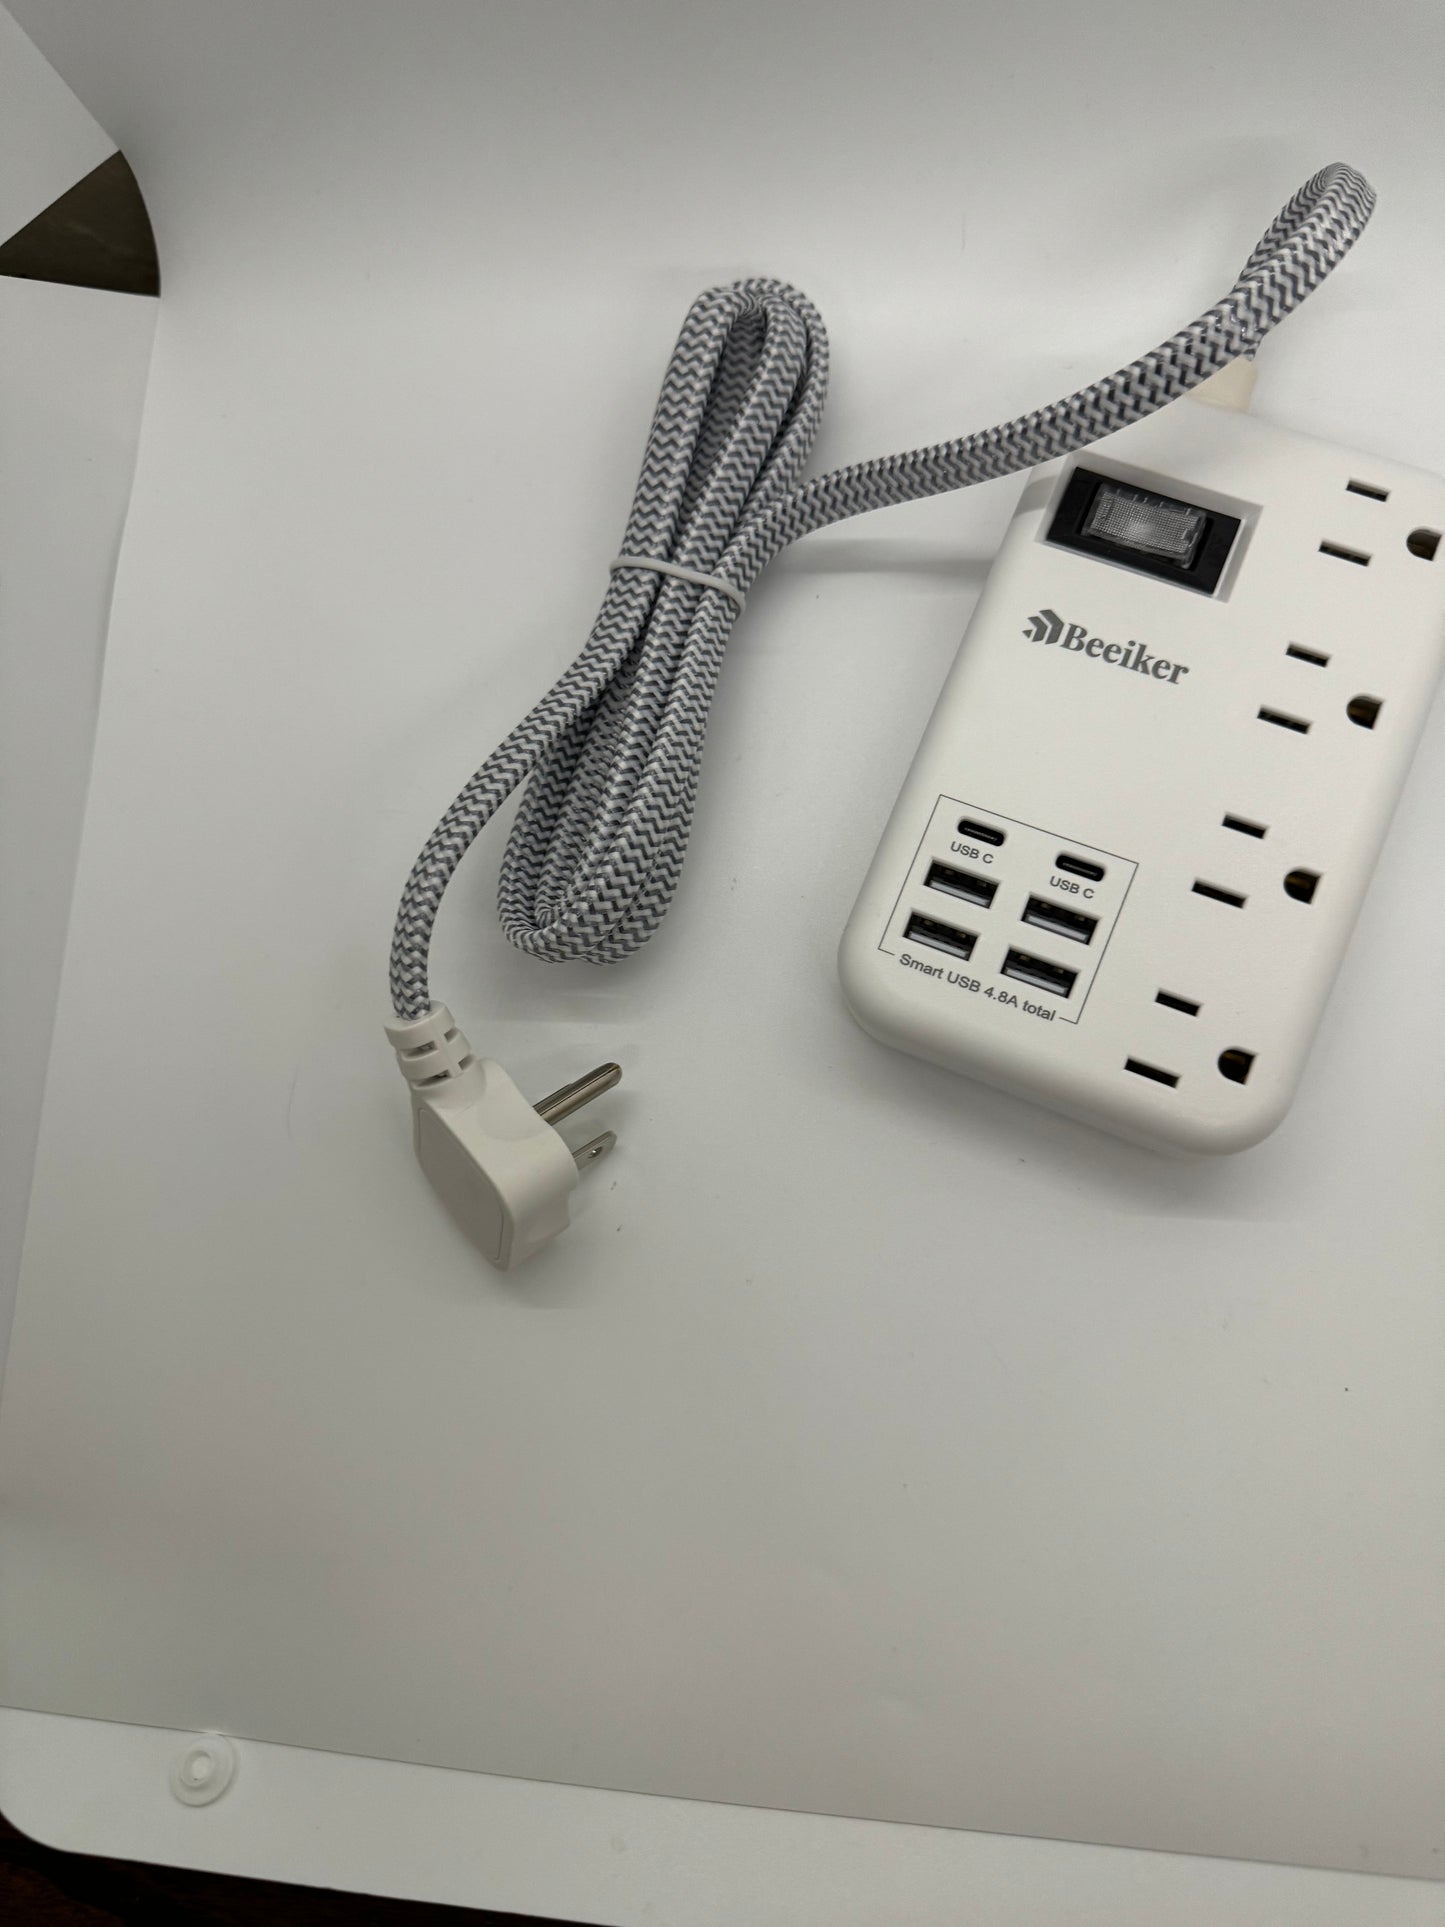 10 in 1 lightweight power strip with 980 jewels of surge protection, 4 AC outlets, 4 standard USB-A ports, and 2 USB-C ports. Power and charge up to 10 devices at one time